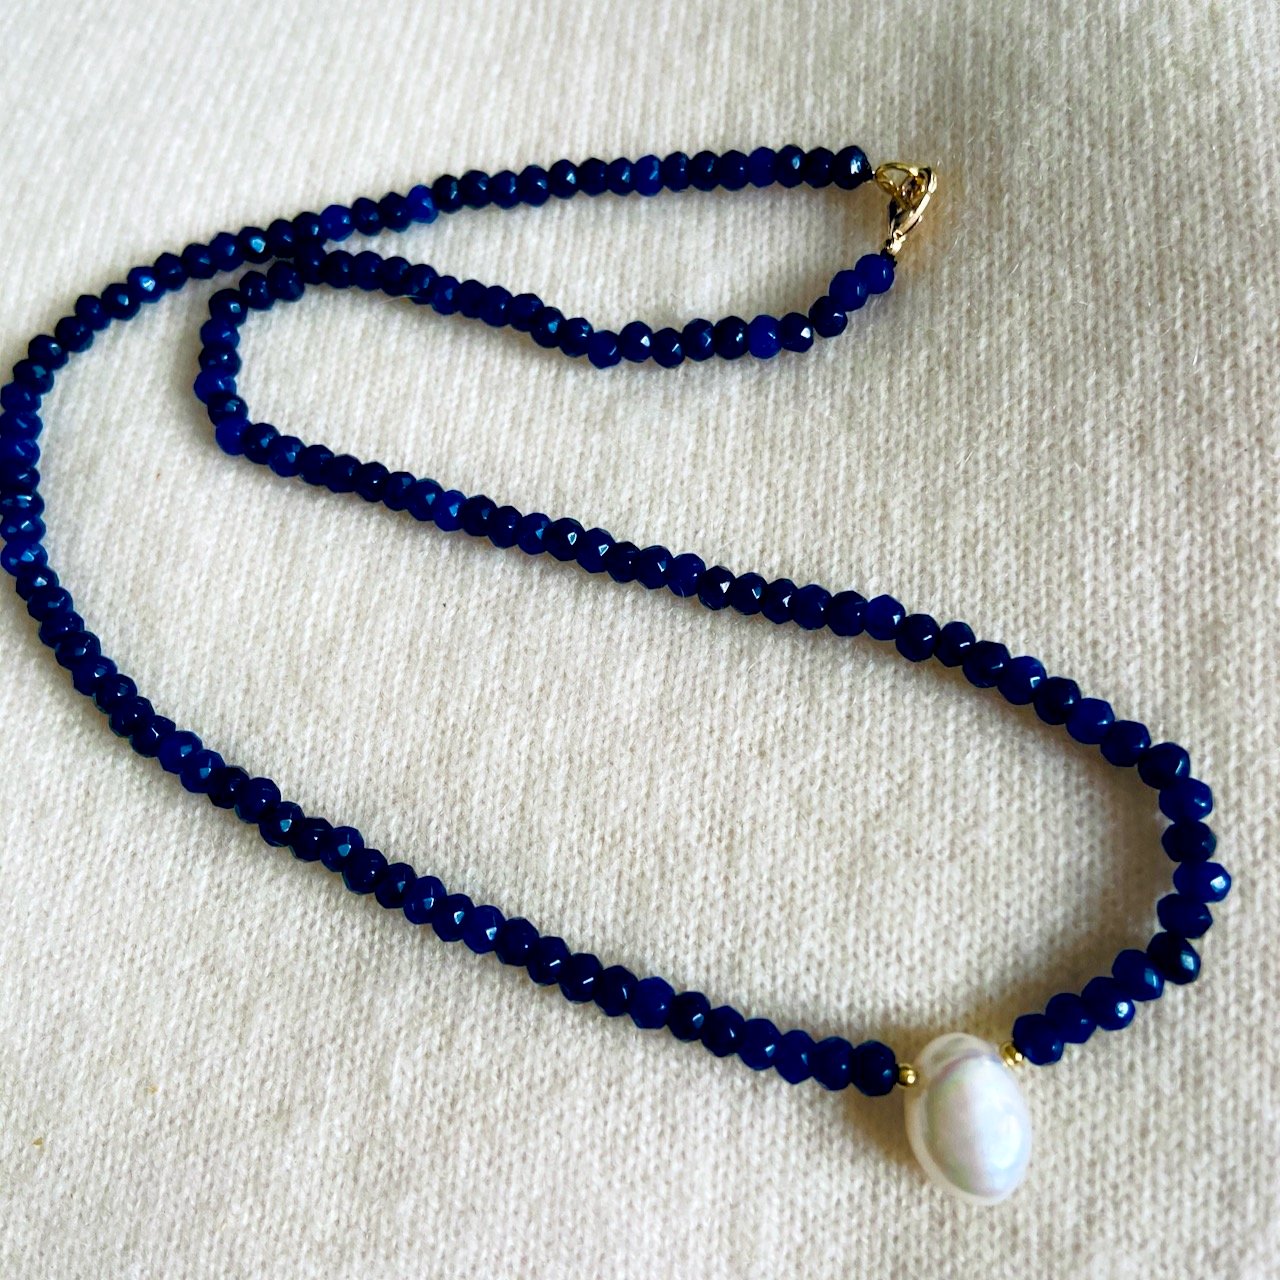 Dainty Blue Spinel Gemstone Freshwater Pearl Pendant Necklace 18"